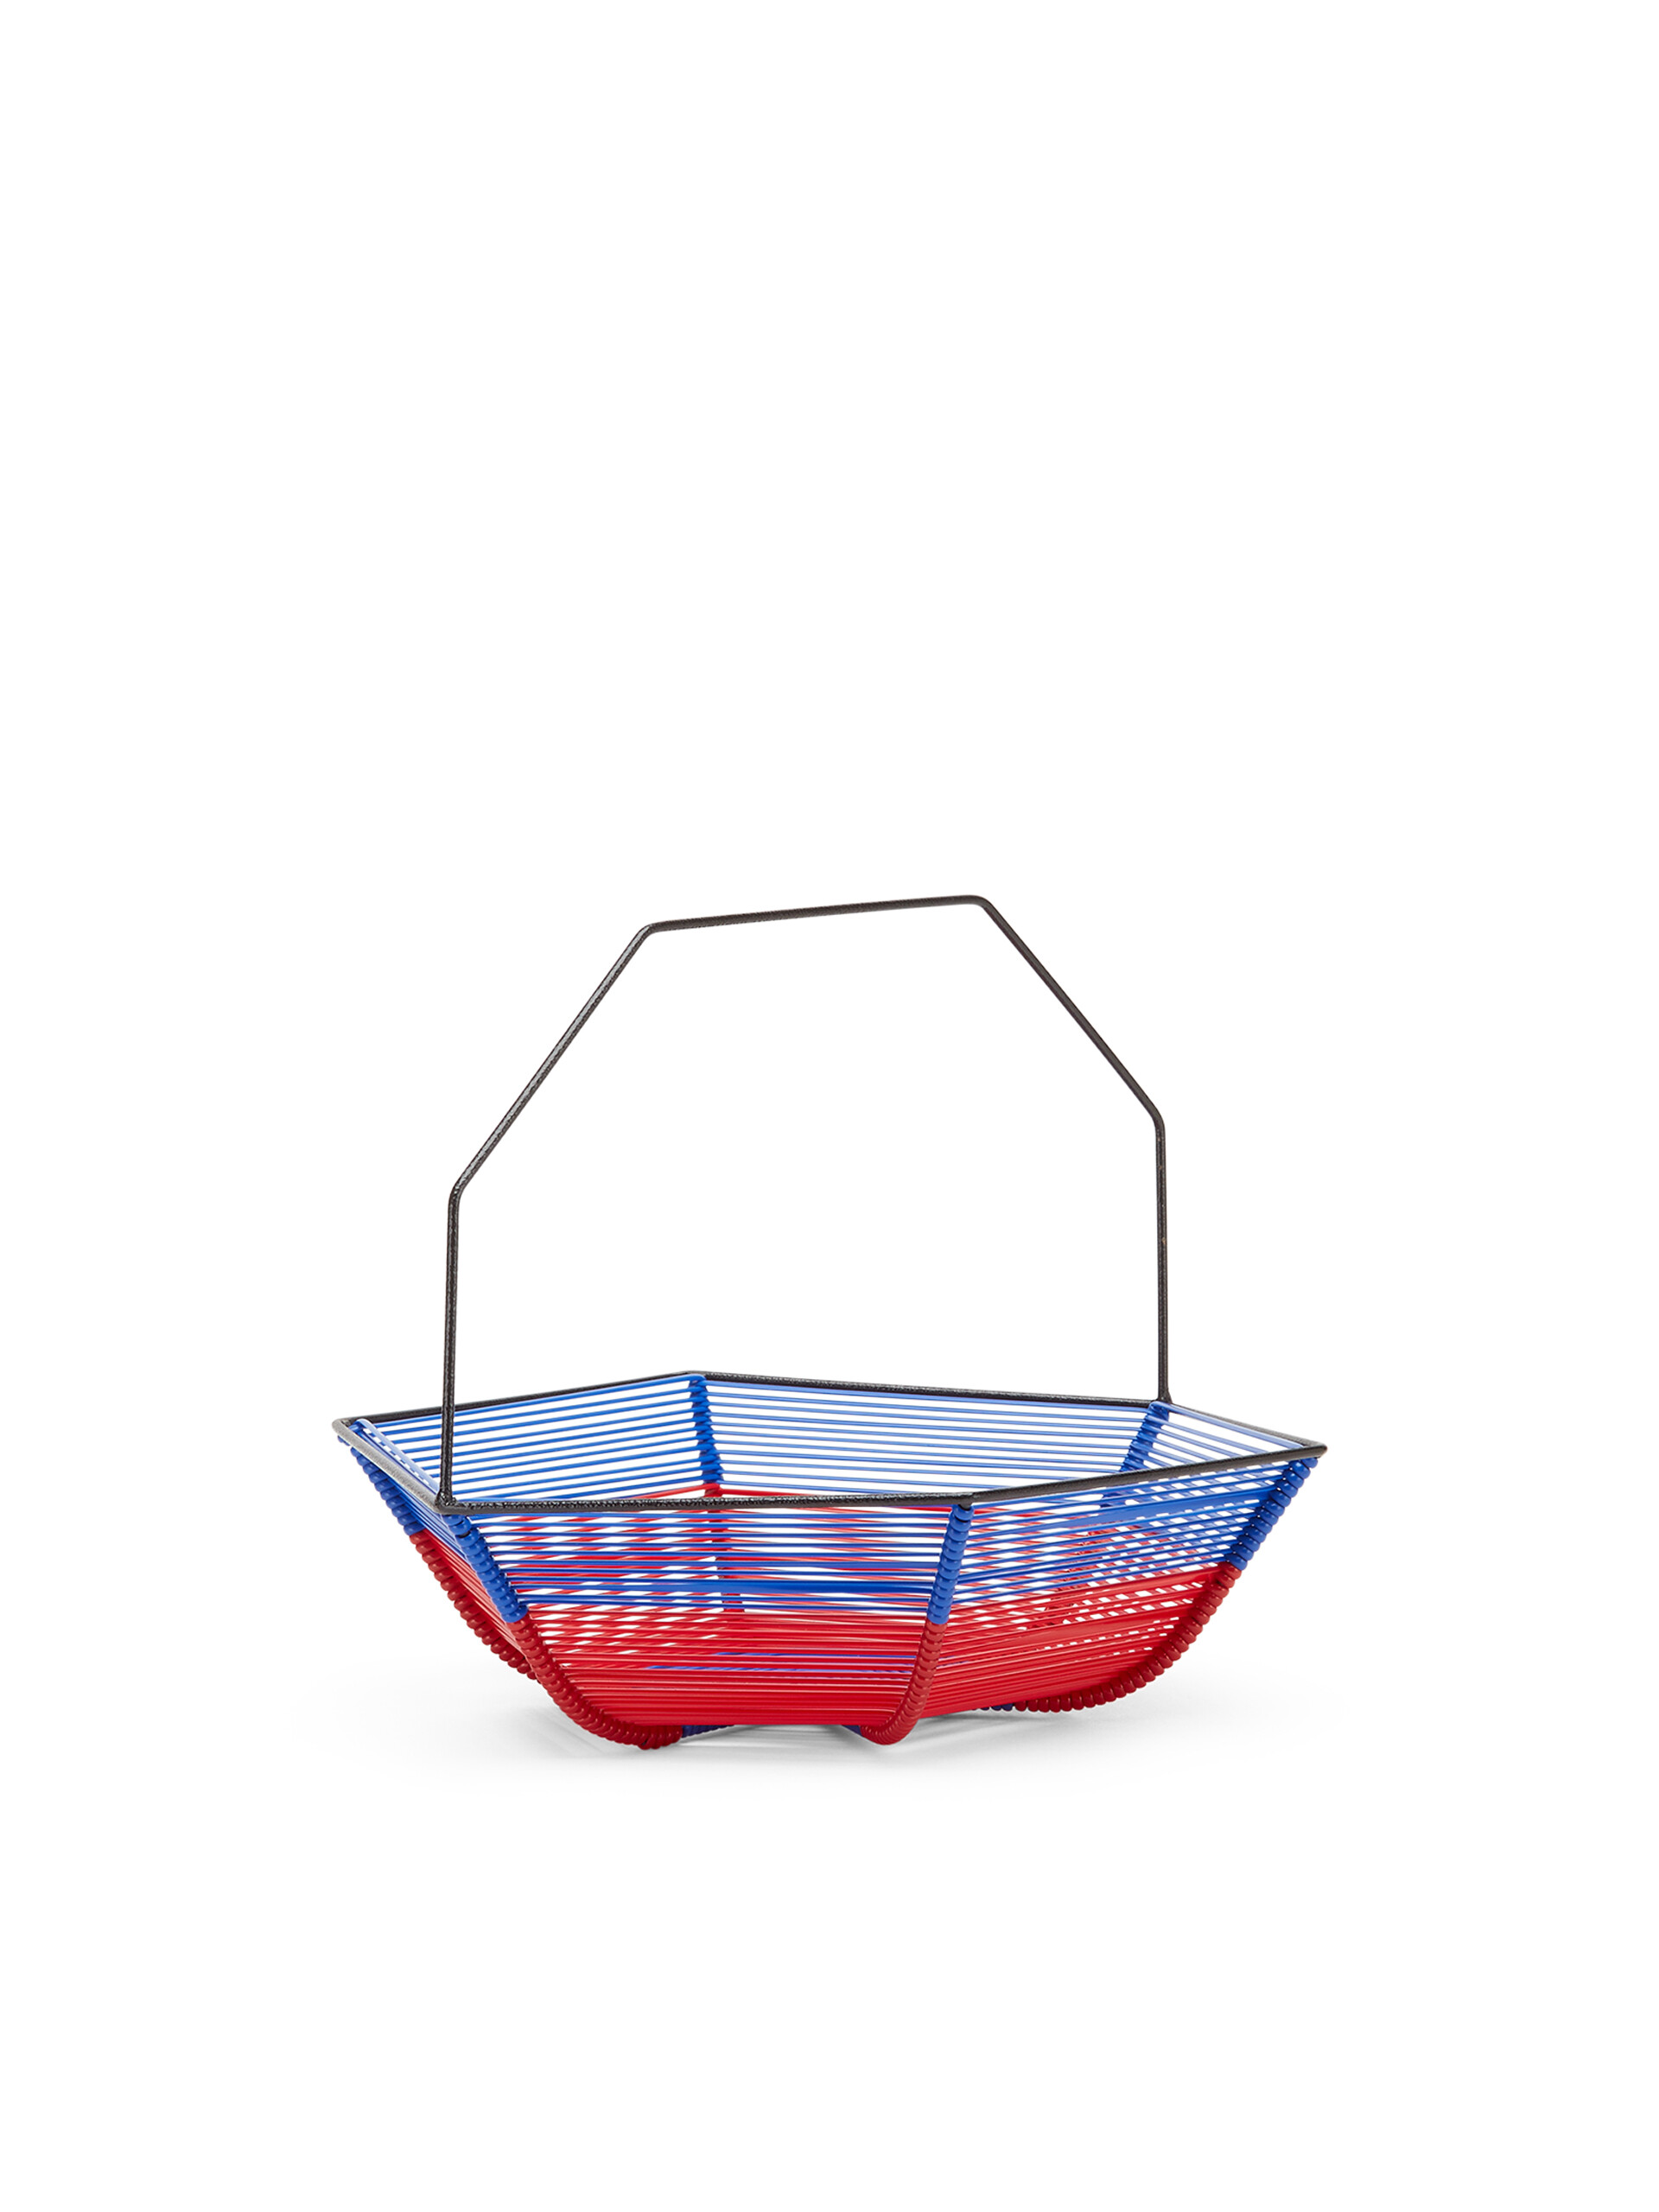 MARNI MARKET iron hexagonal fruit holder with blue and red PVC - Home Accessories - Image 2